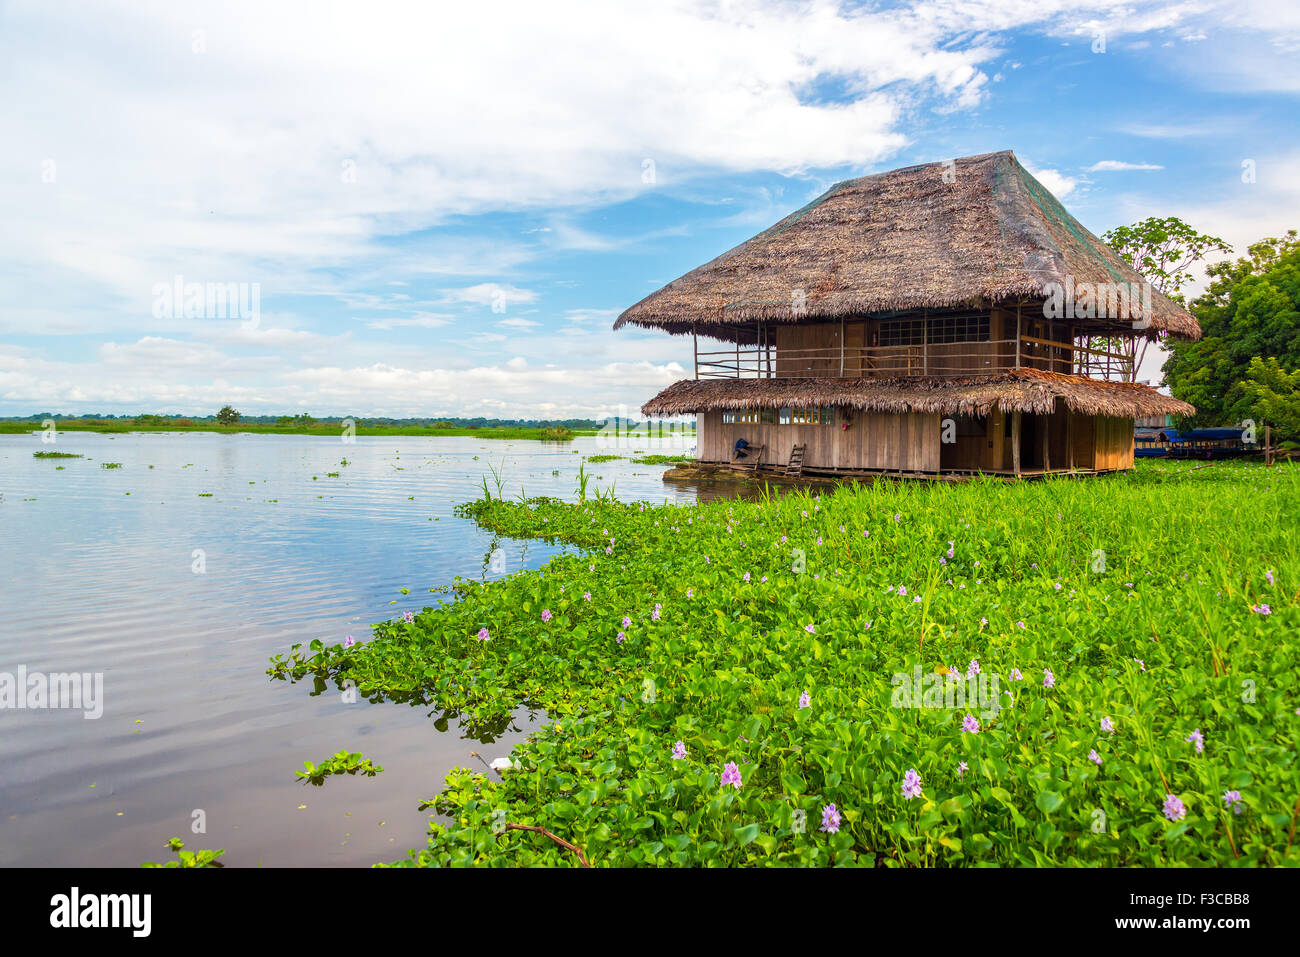 Old wooden shack floating on the Amazon River in Iquitos, Peru Stock Photo